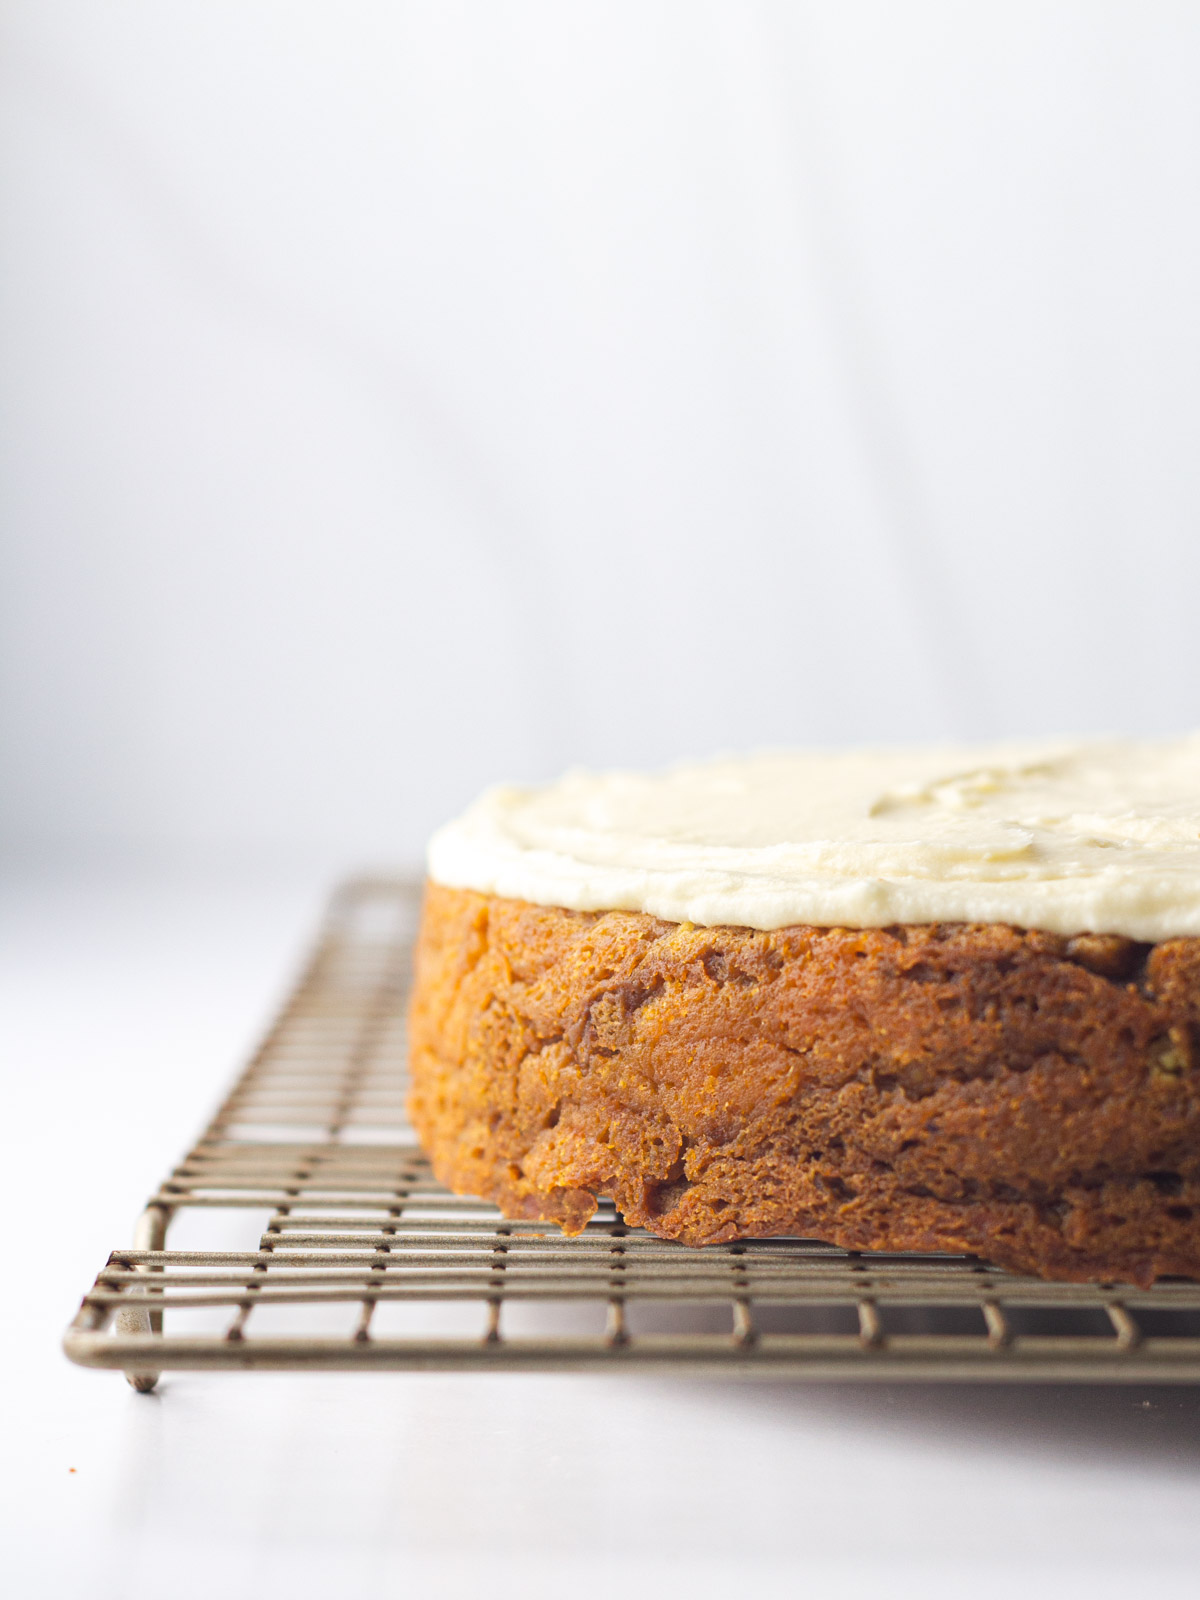 A frosted sweet potato cake on a gold wire rack going out of frame on the right.